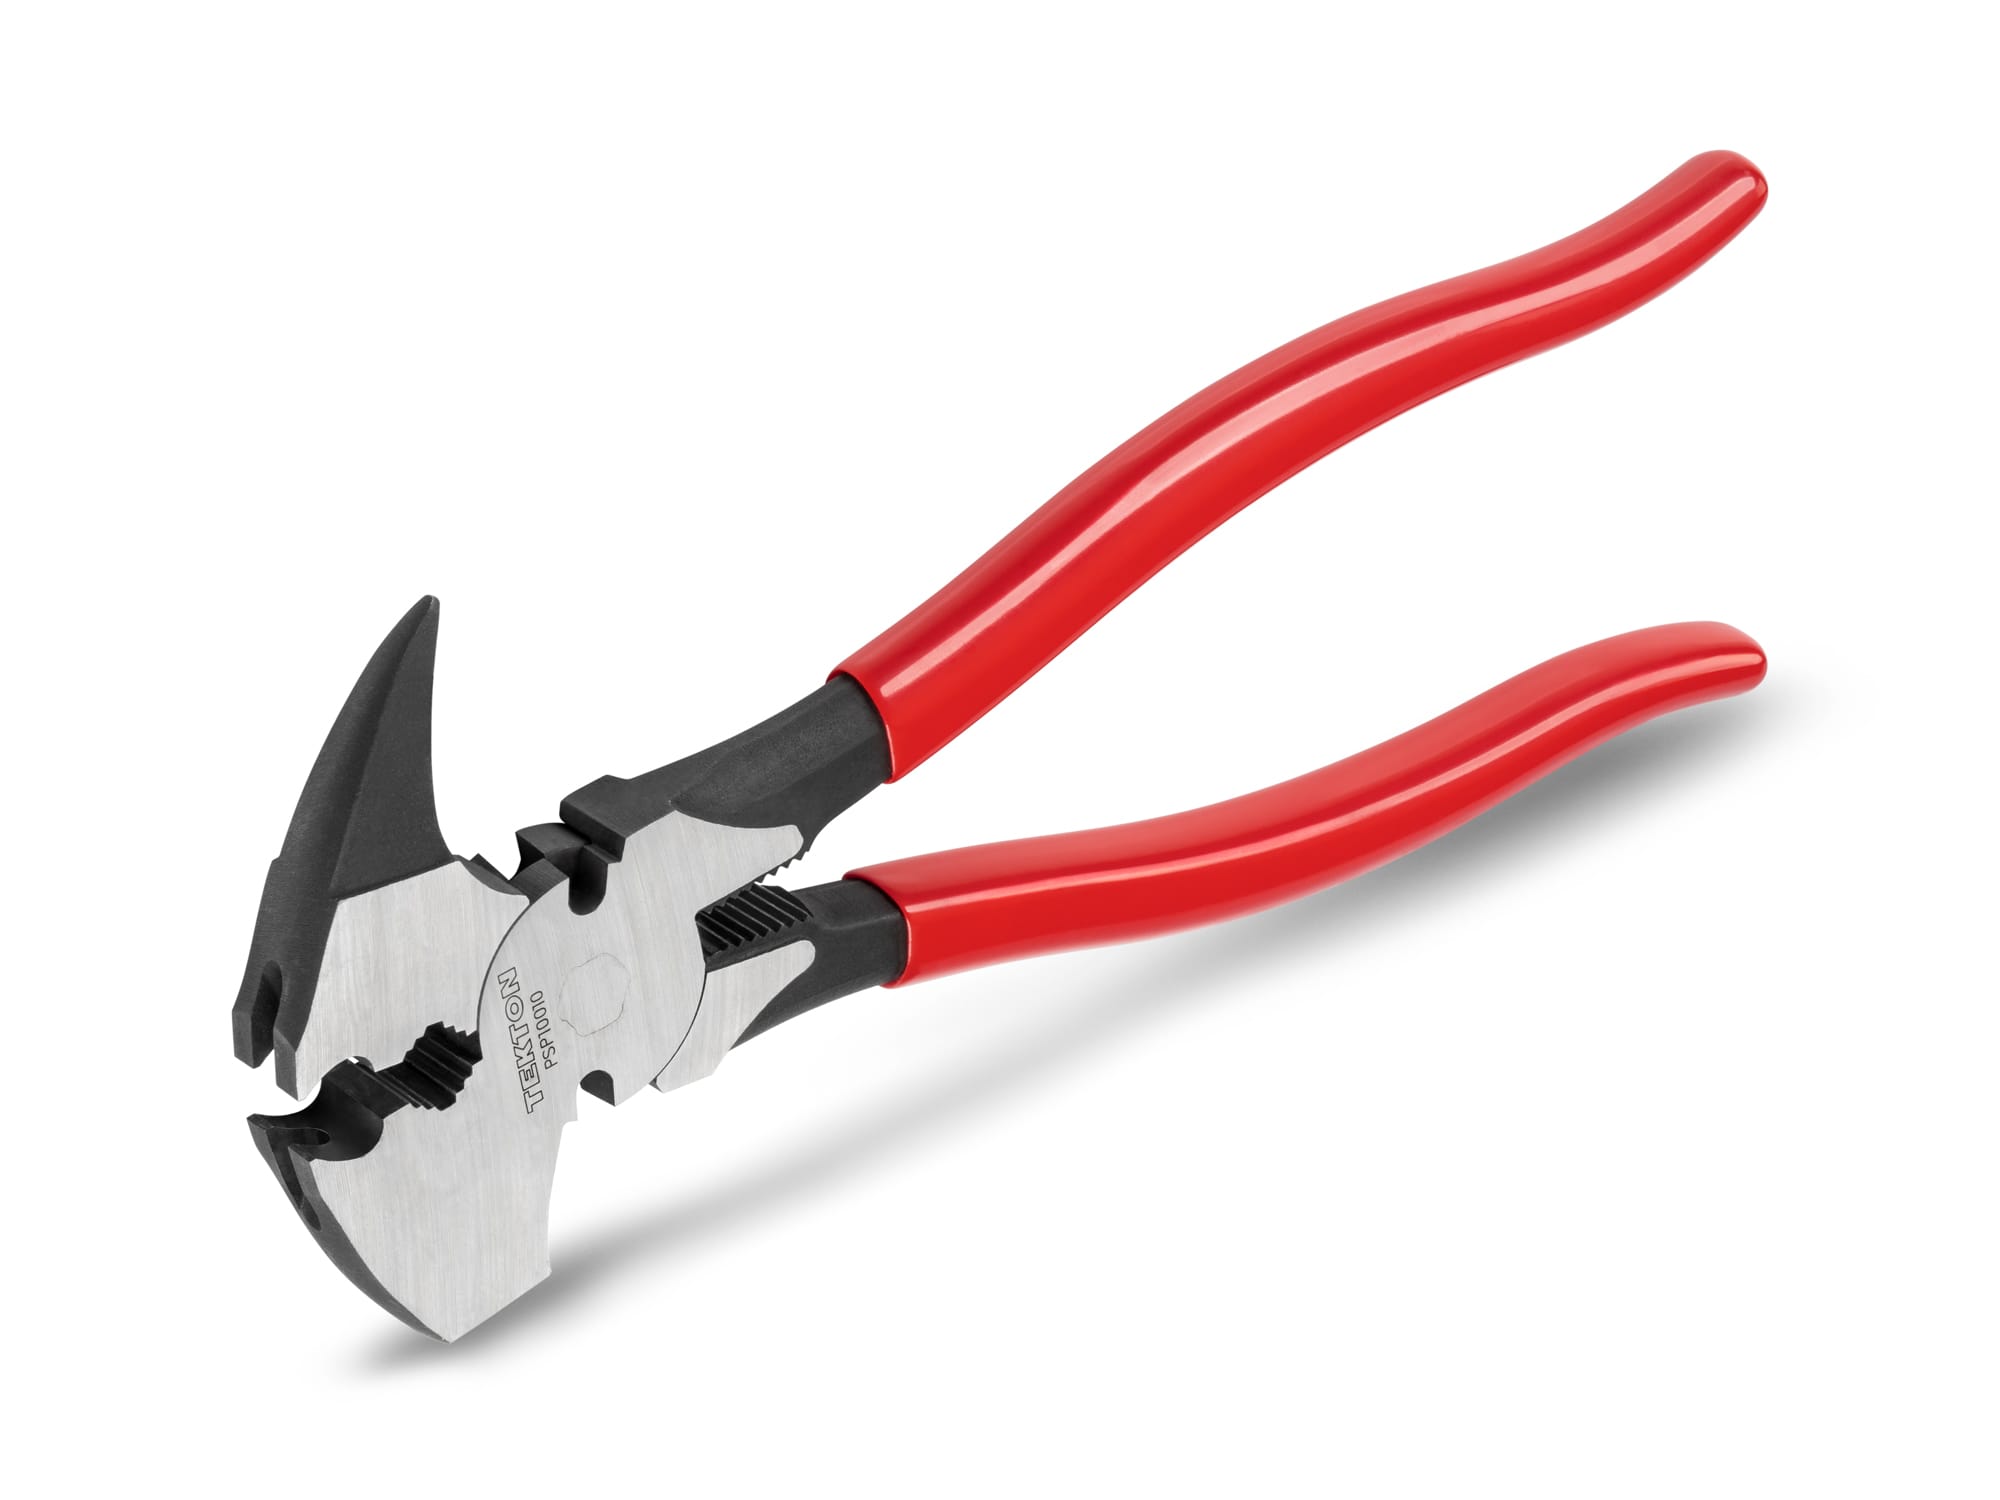 Tekton 10-1/2 in. Fencing Pliers PSP10010